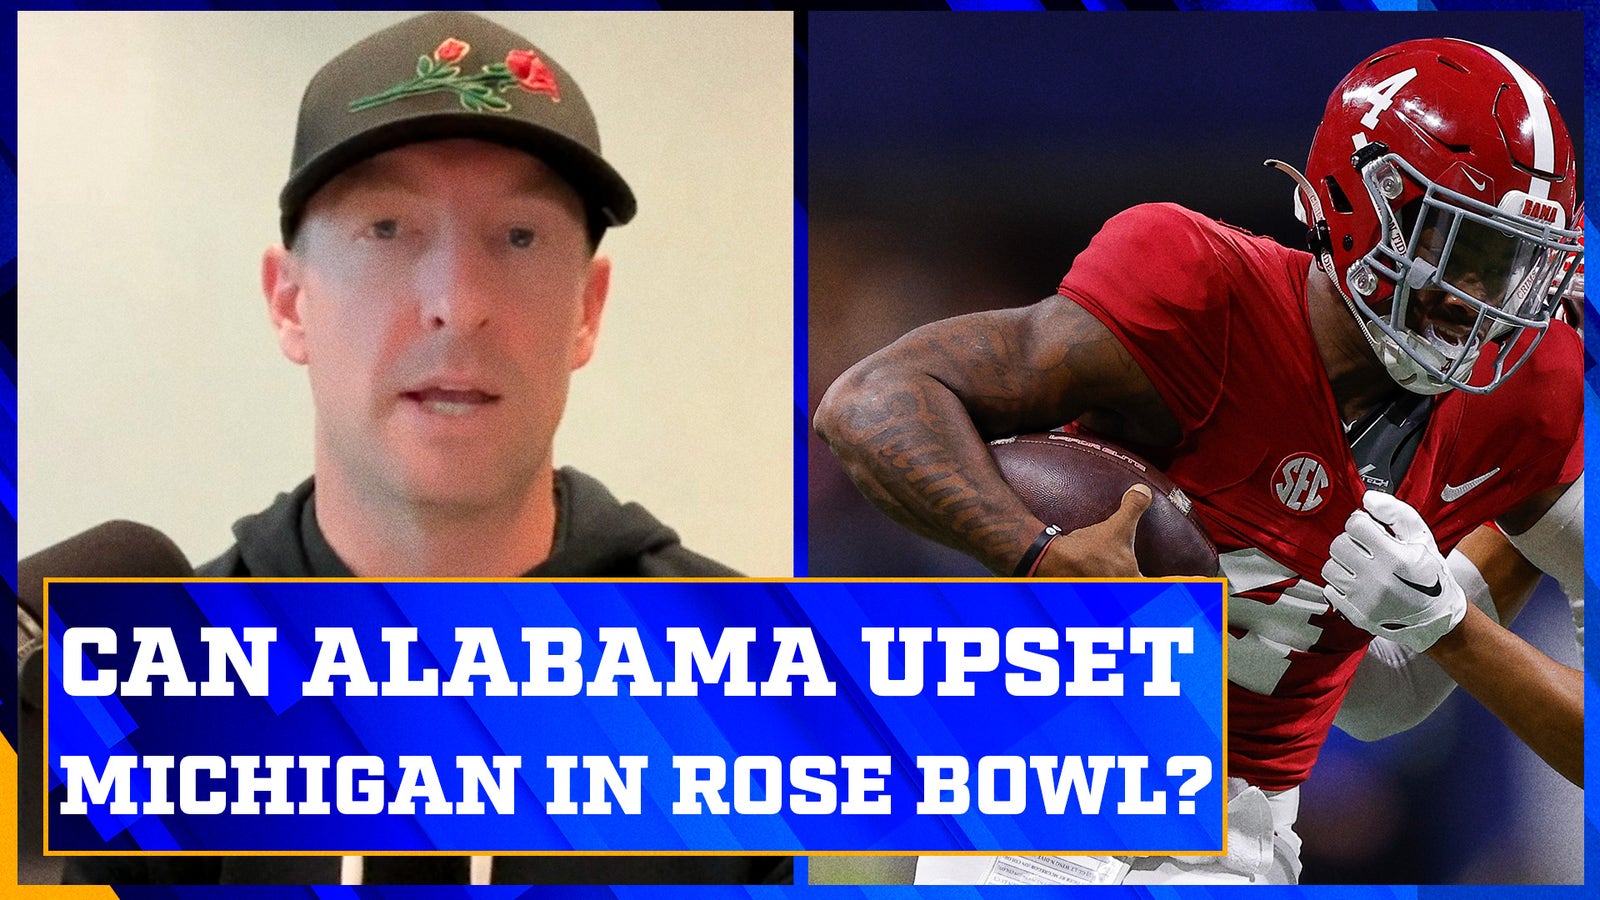 Rose Bowl Preview: Will Alabama topple top-seeded Michigan?